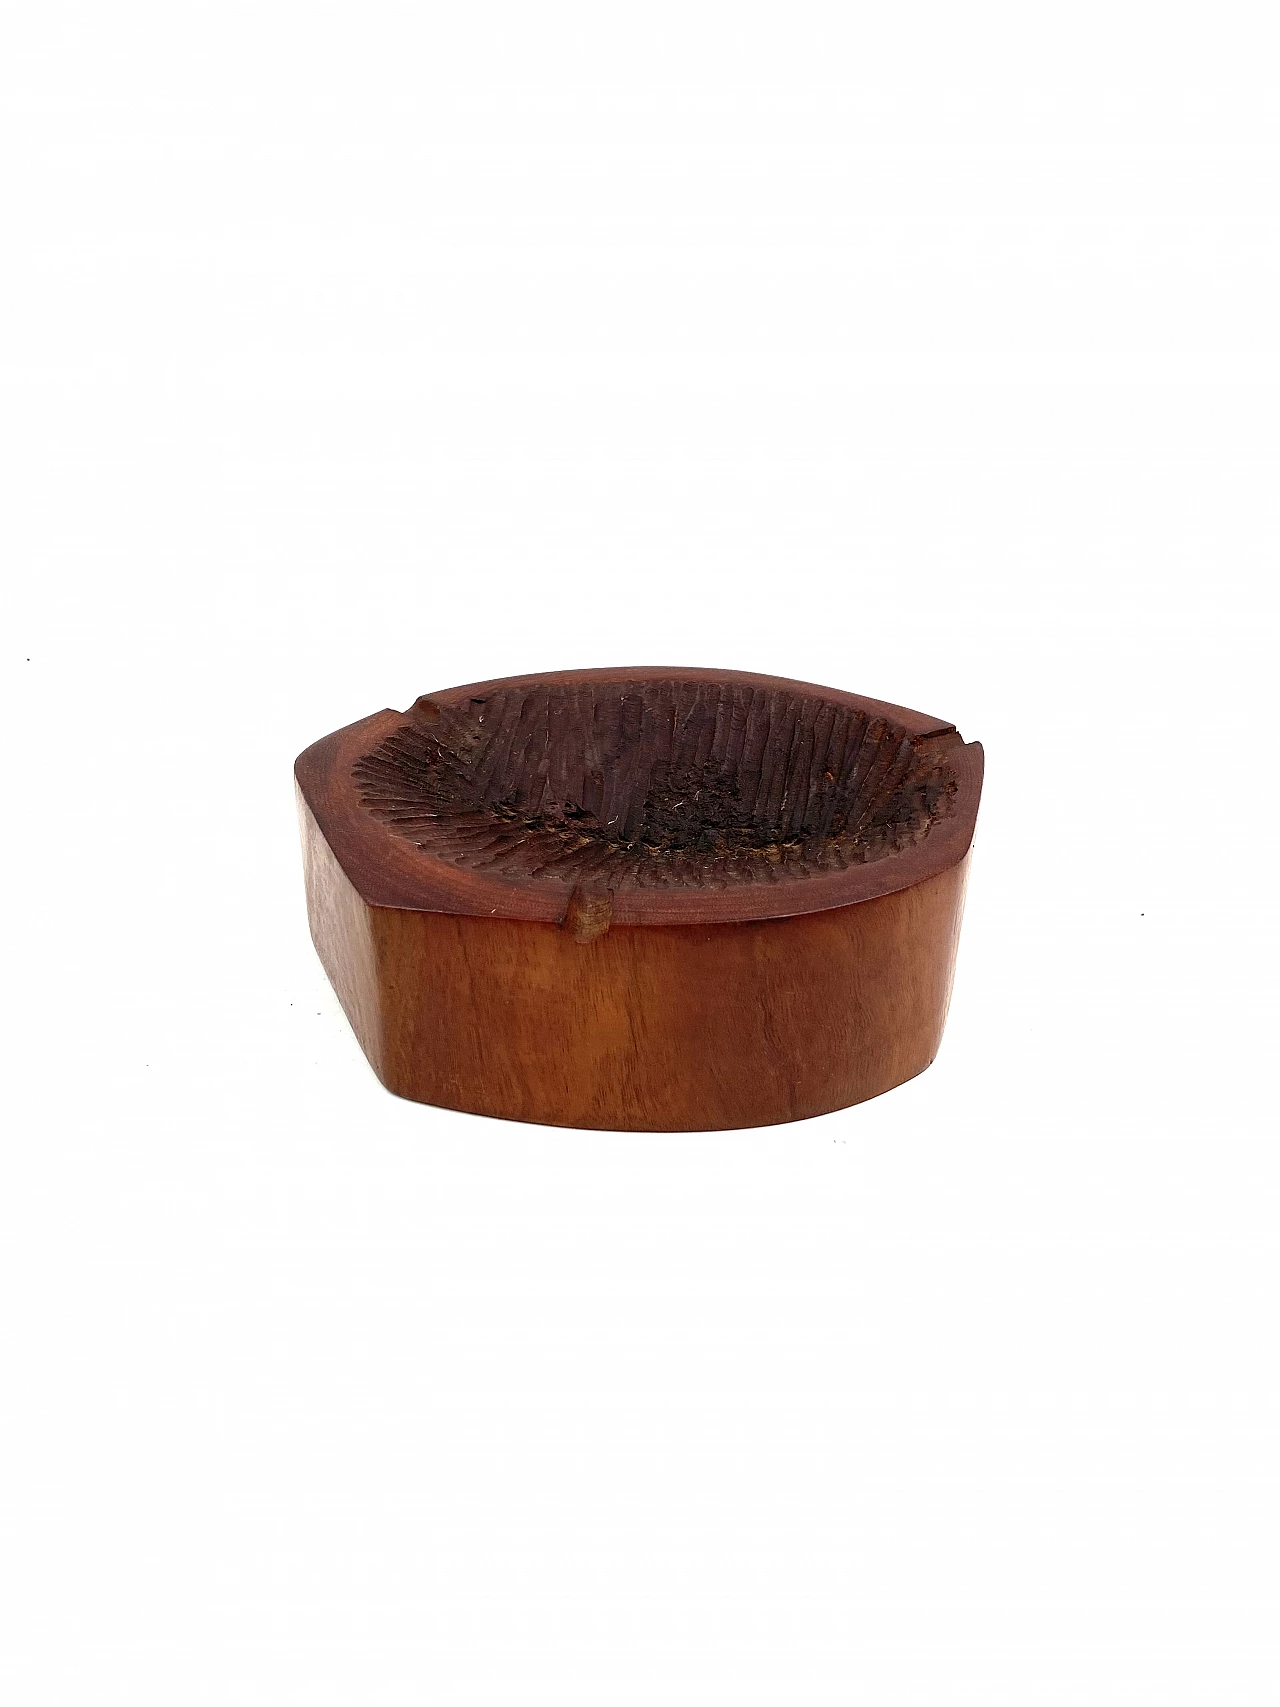 Pair of wooden ashtrays in Monique Gerber's style, 1970s 23